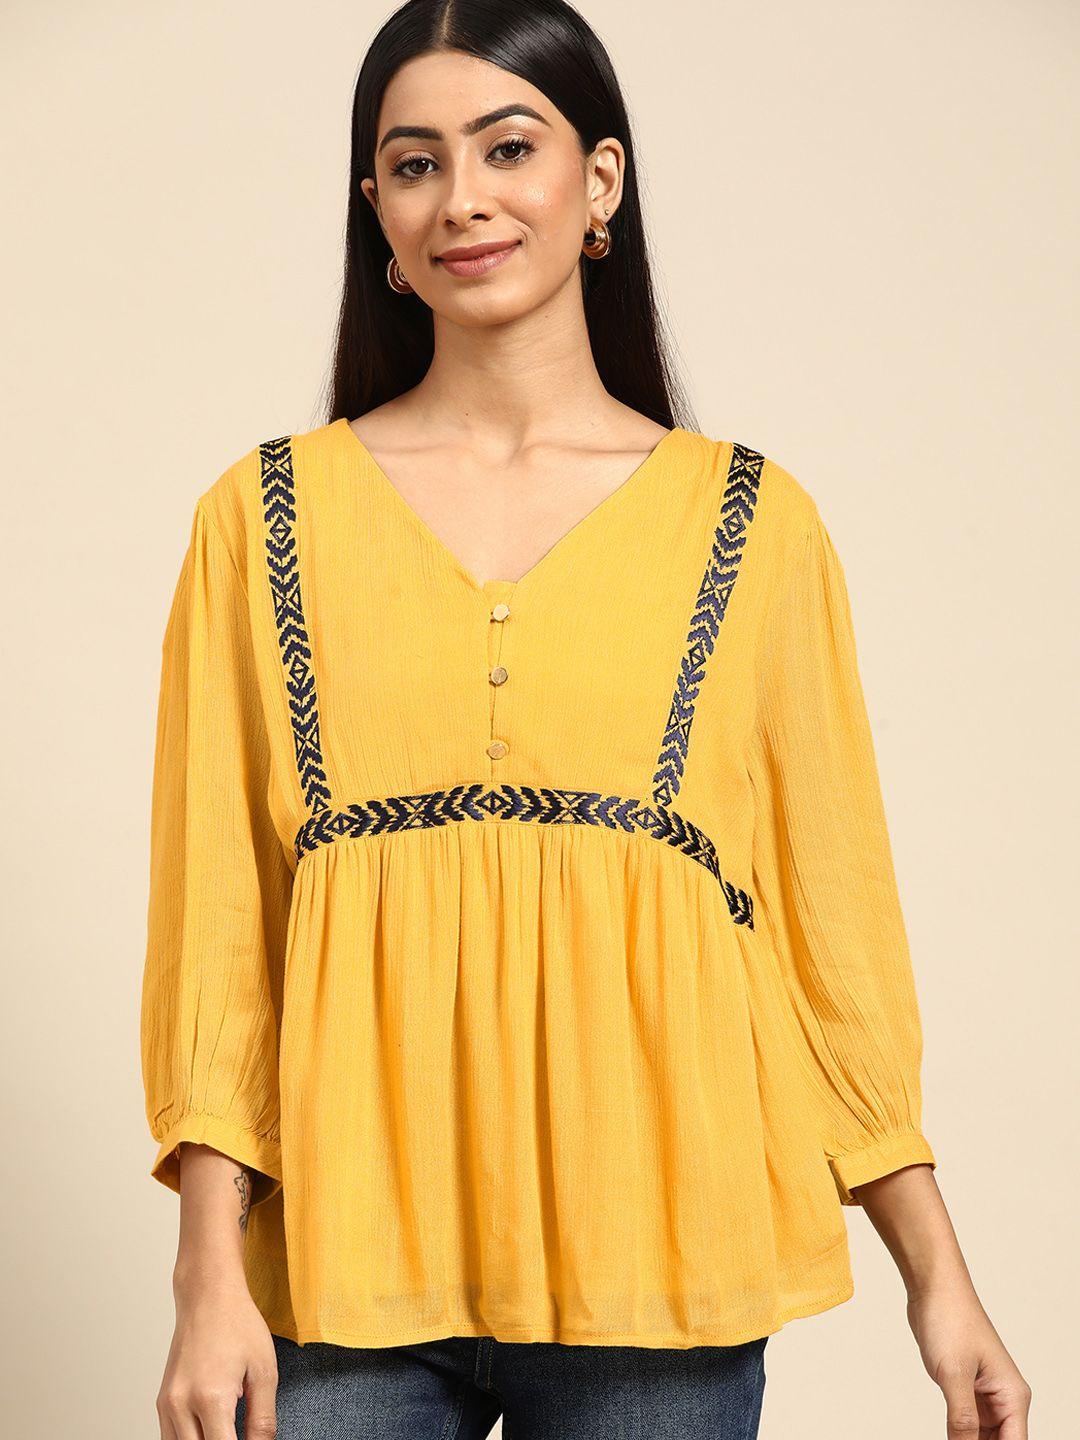 all about you mustard yellow & purple geometric embroidered top